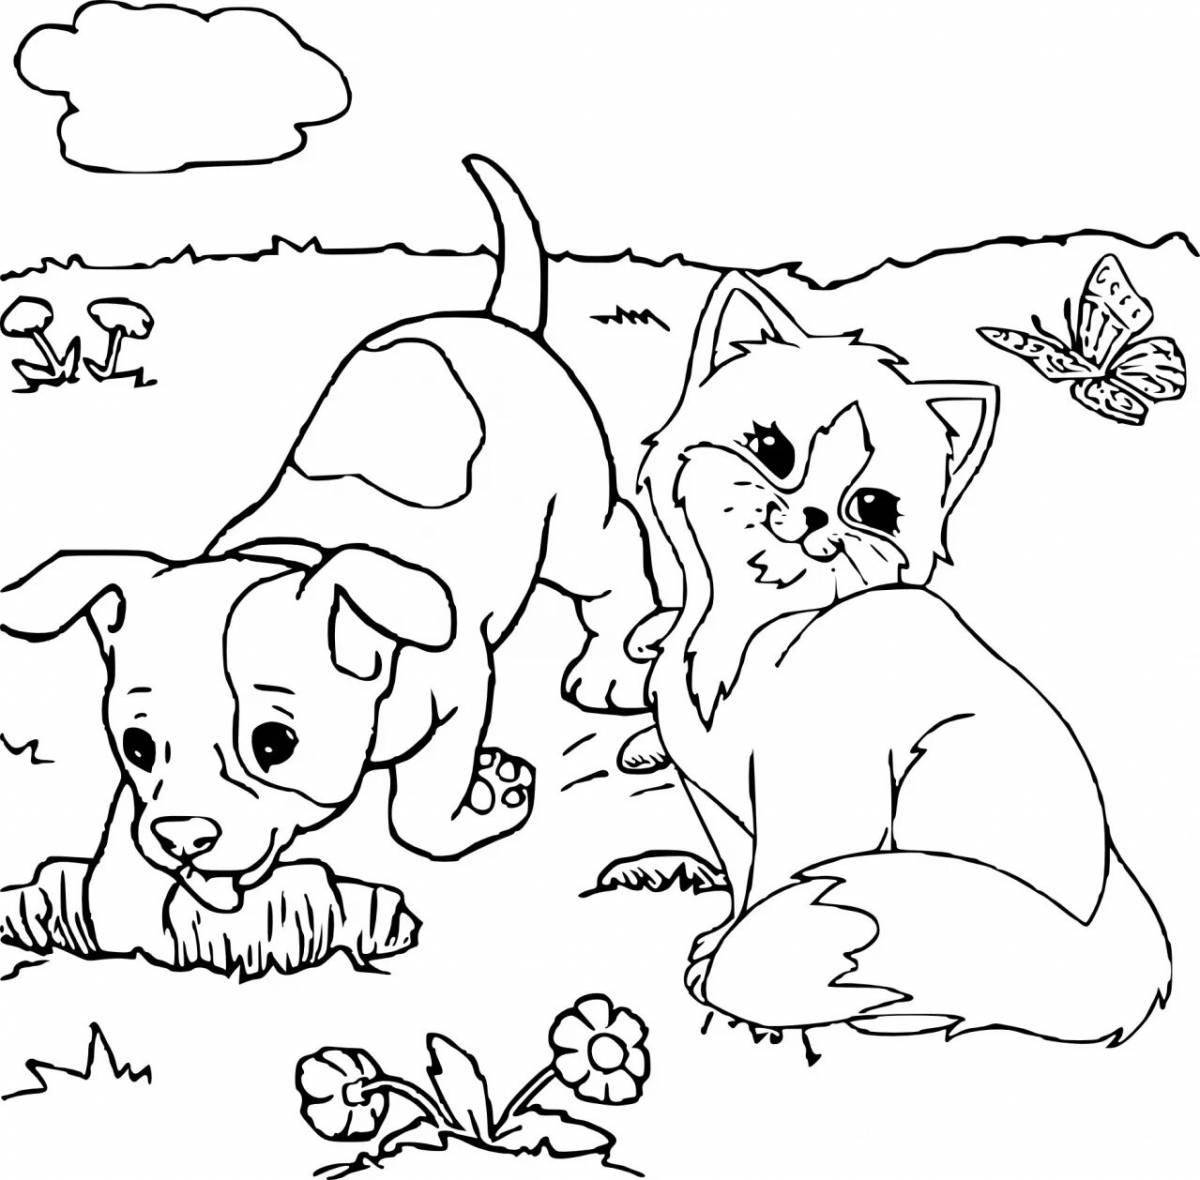 Cat and dog #5